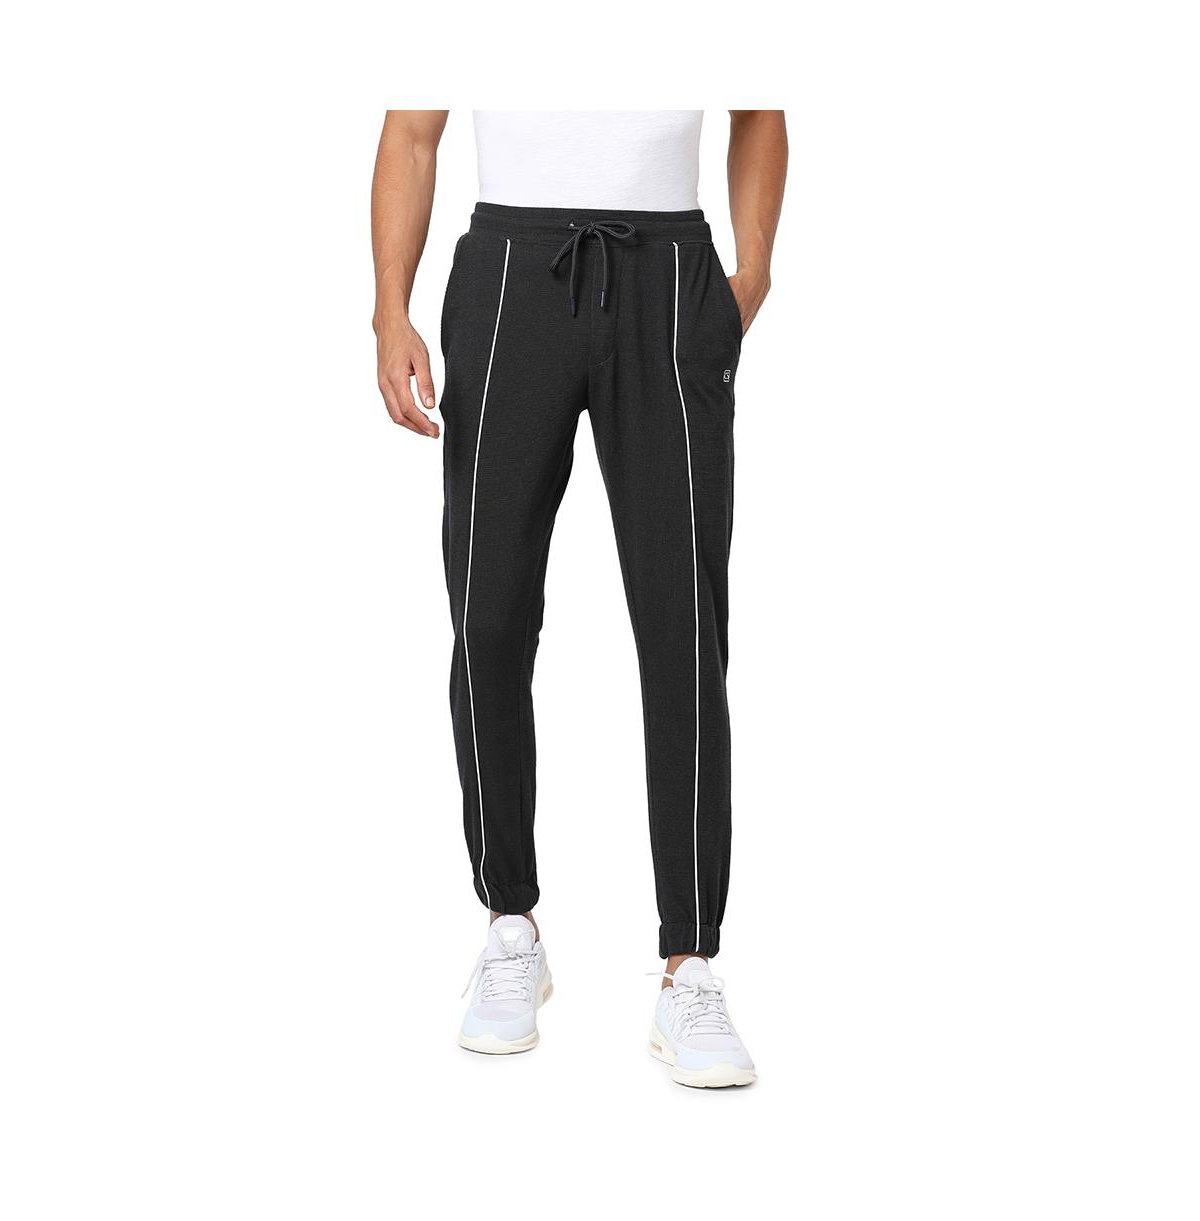 Men's Contrast Piping Active wear Track pants - Carbon black